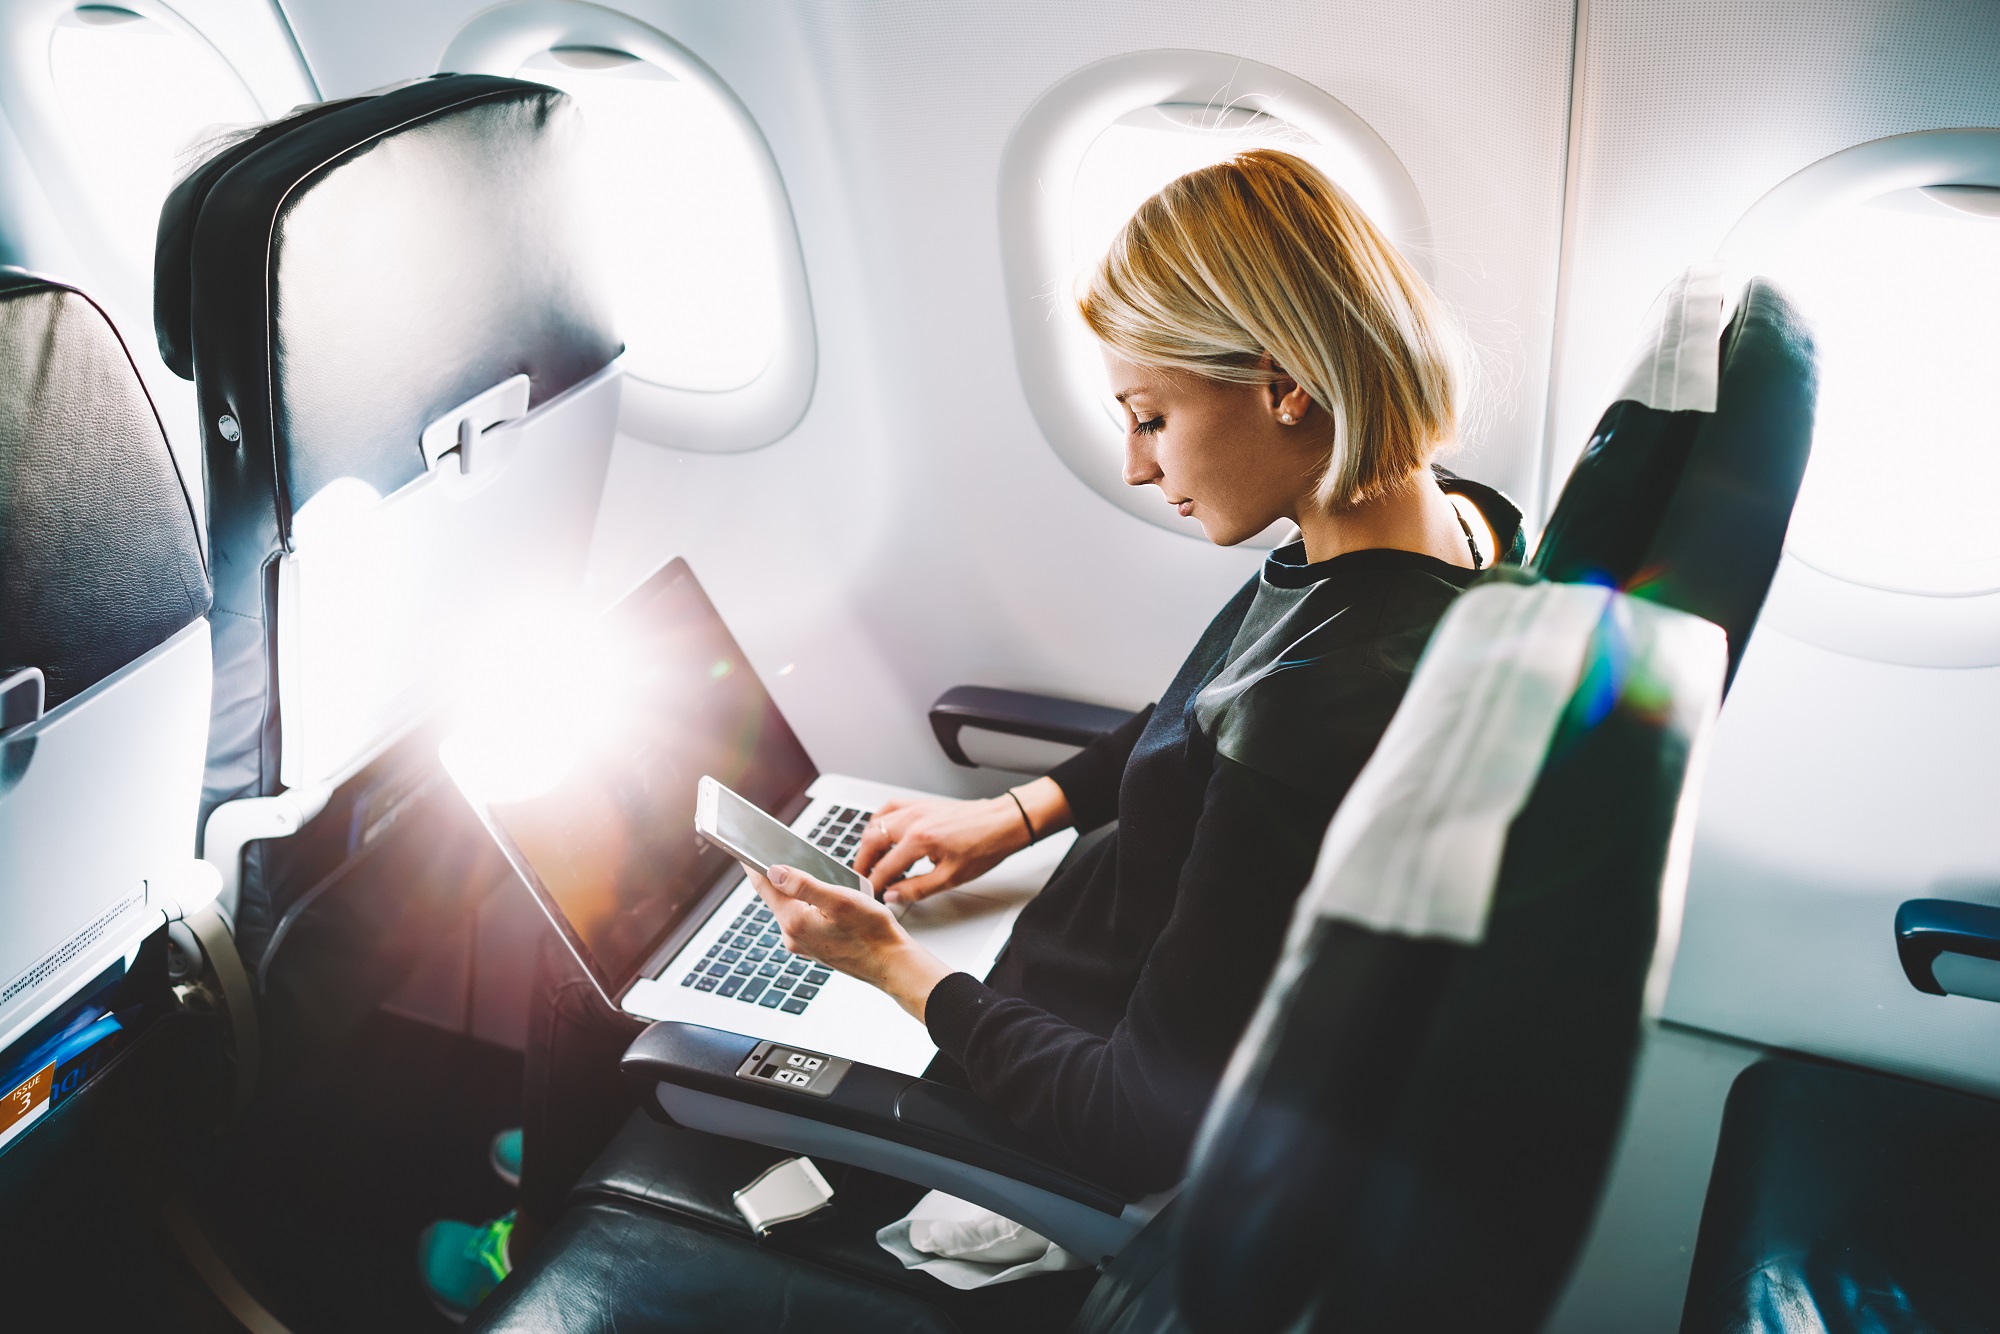 A professional woman is sitting in a seat on an airplane while working on her laptop.